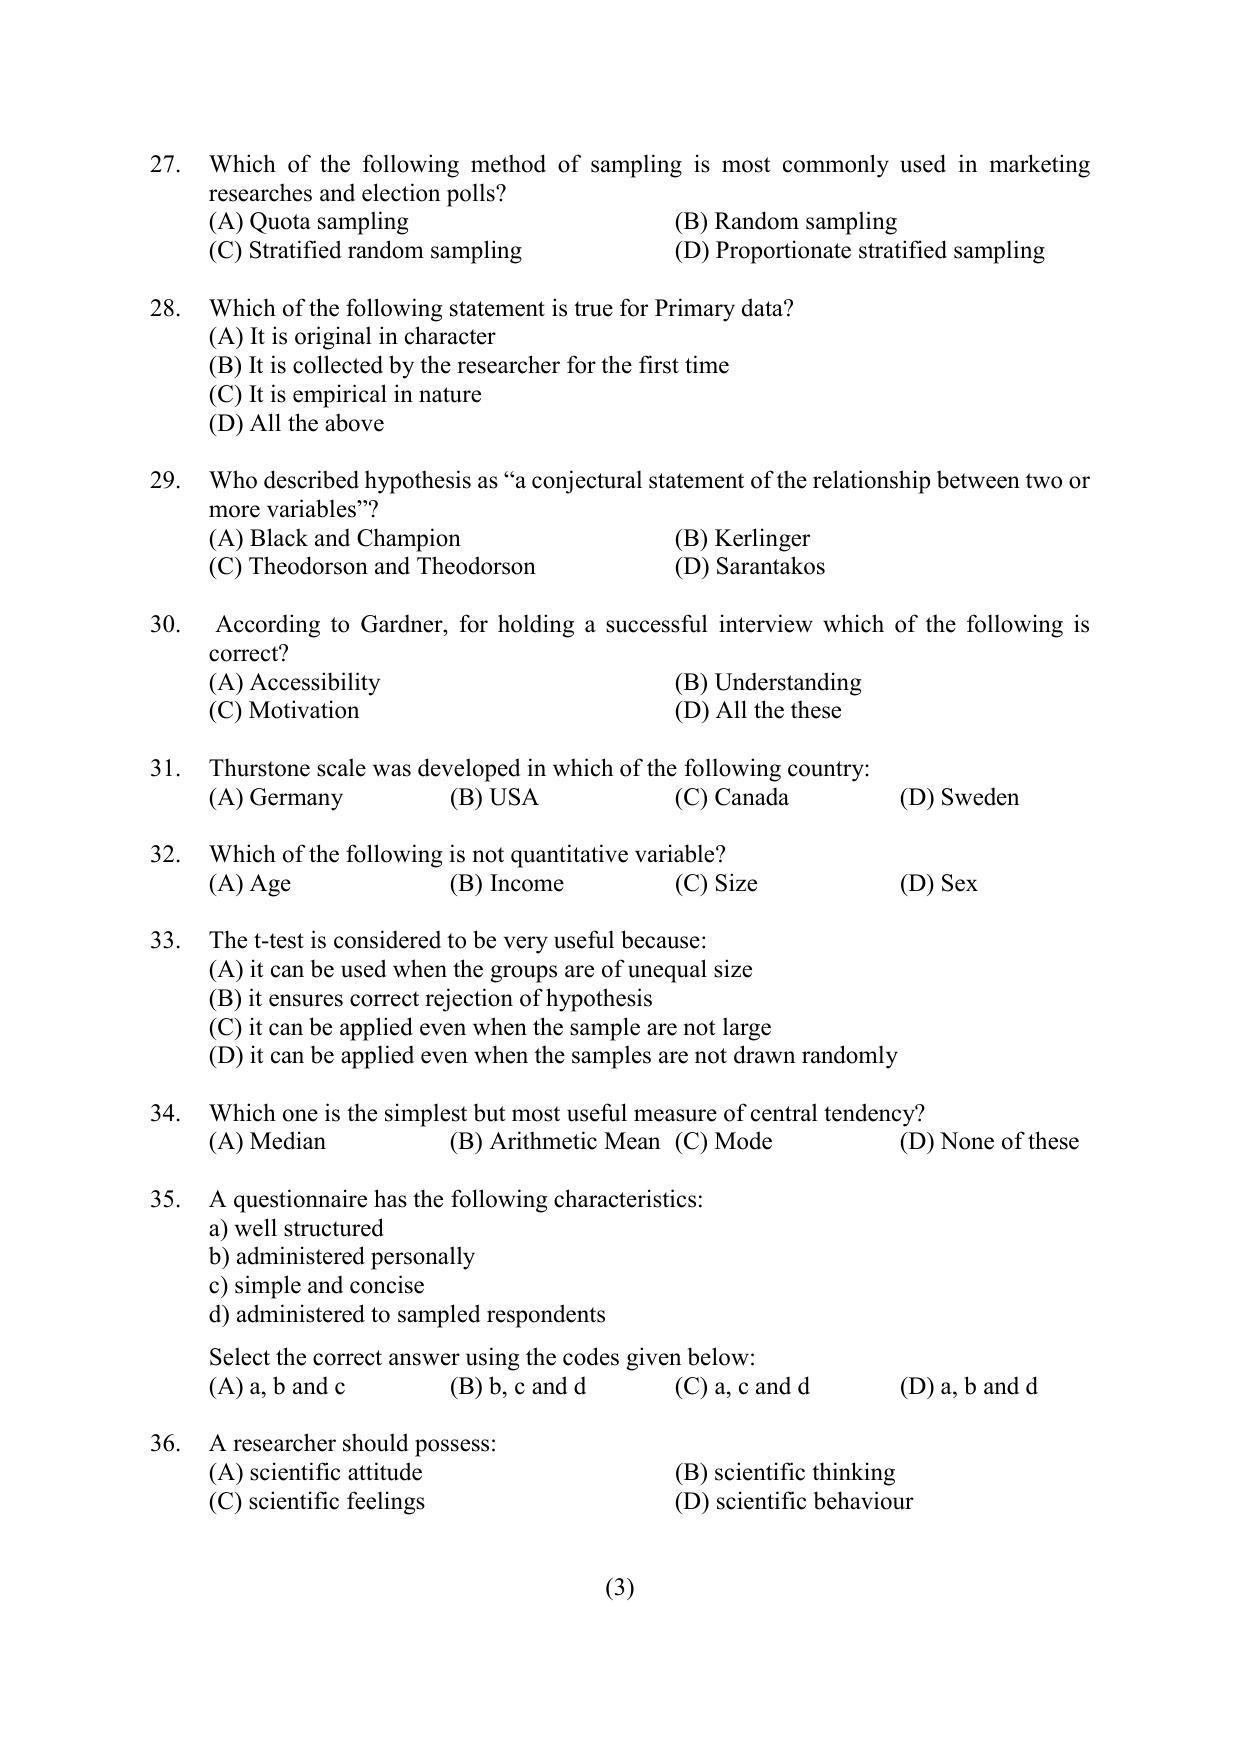 PU MPET Ancient Indian History & Archeology 2022 Question Papers - Page 41